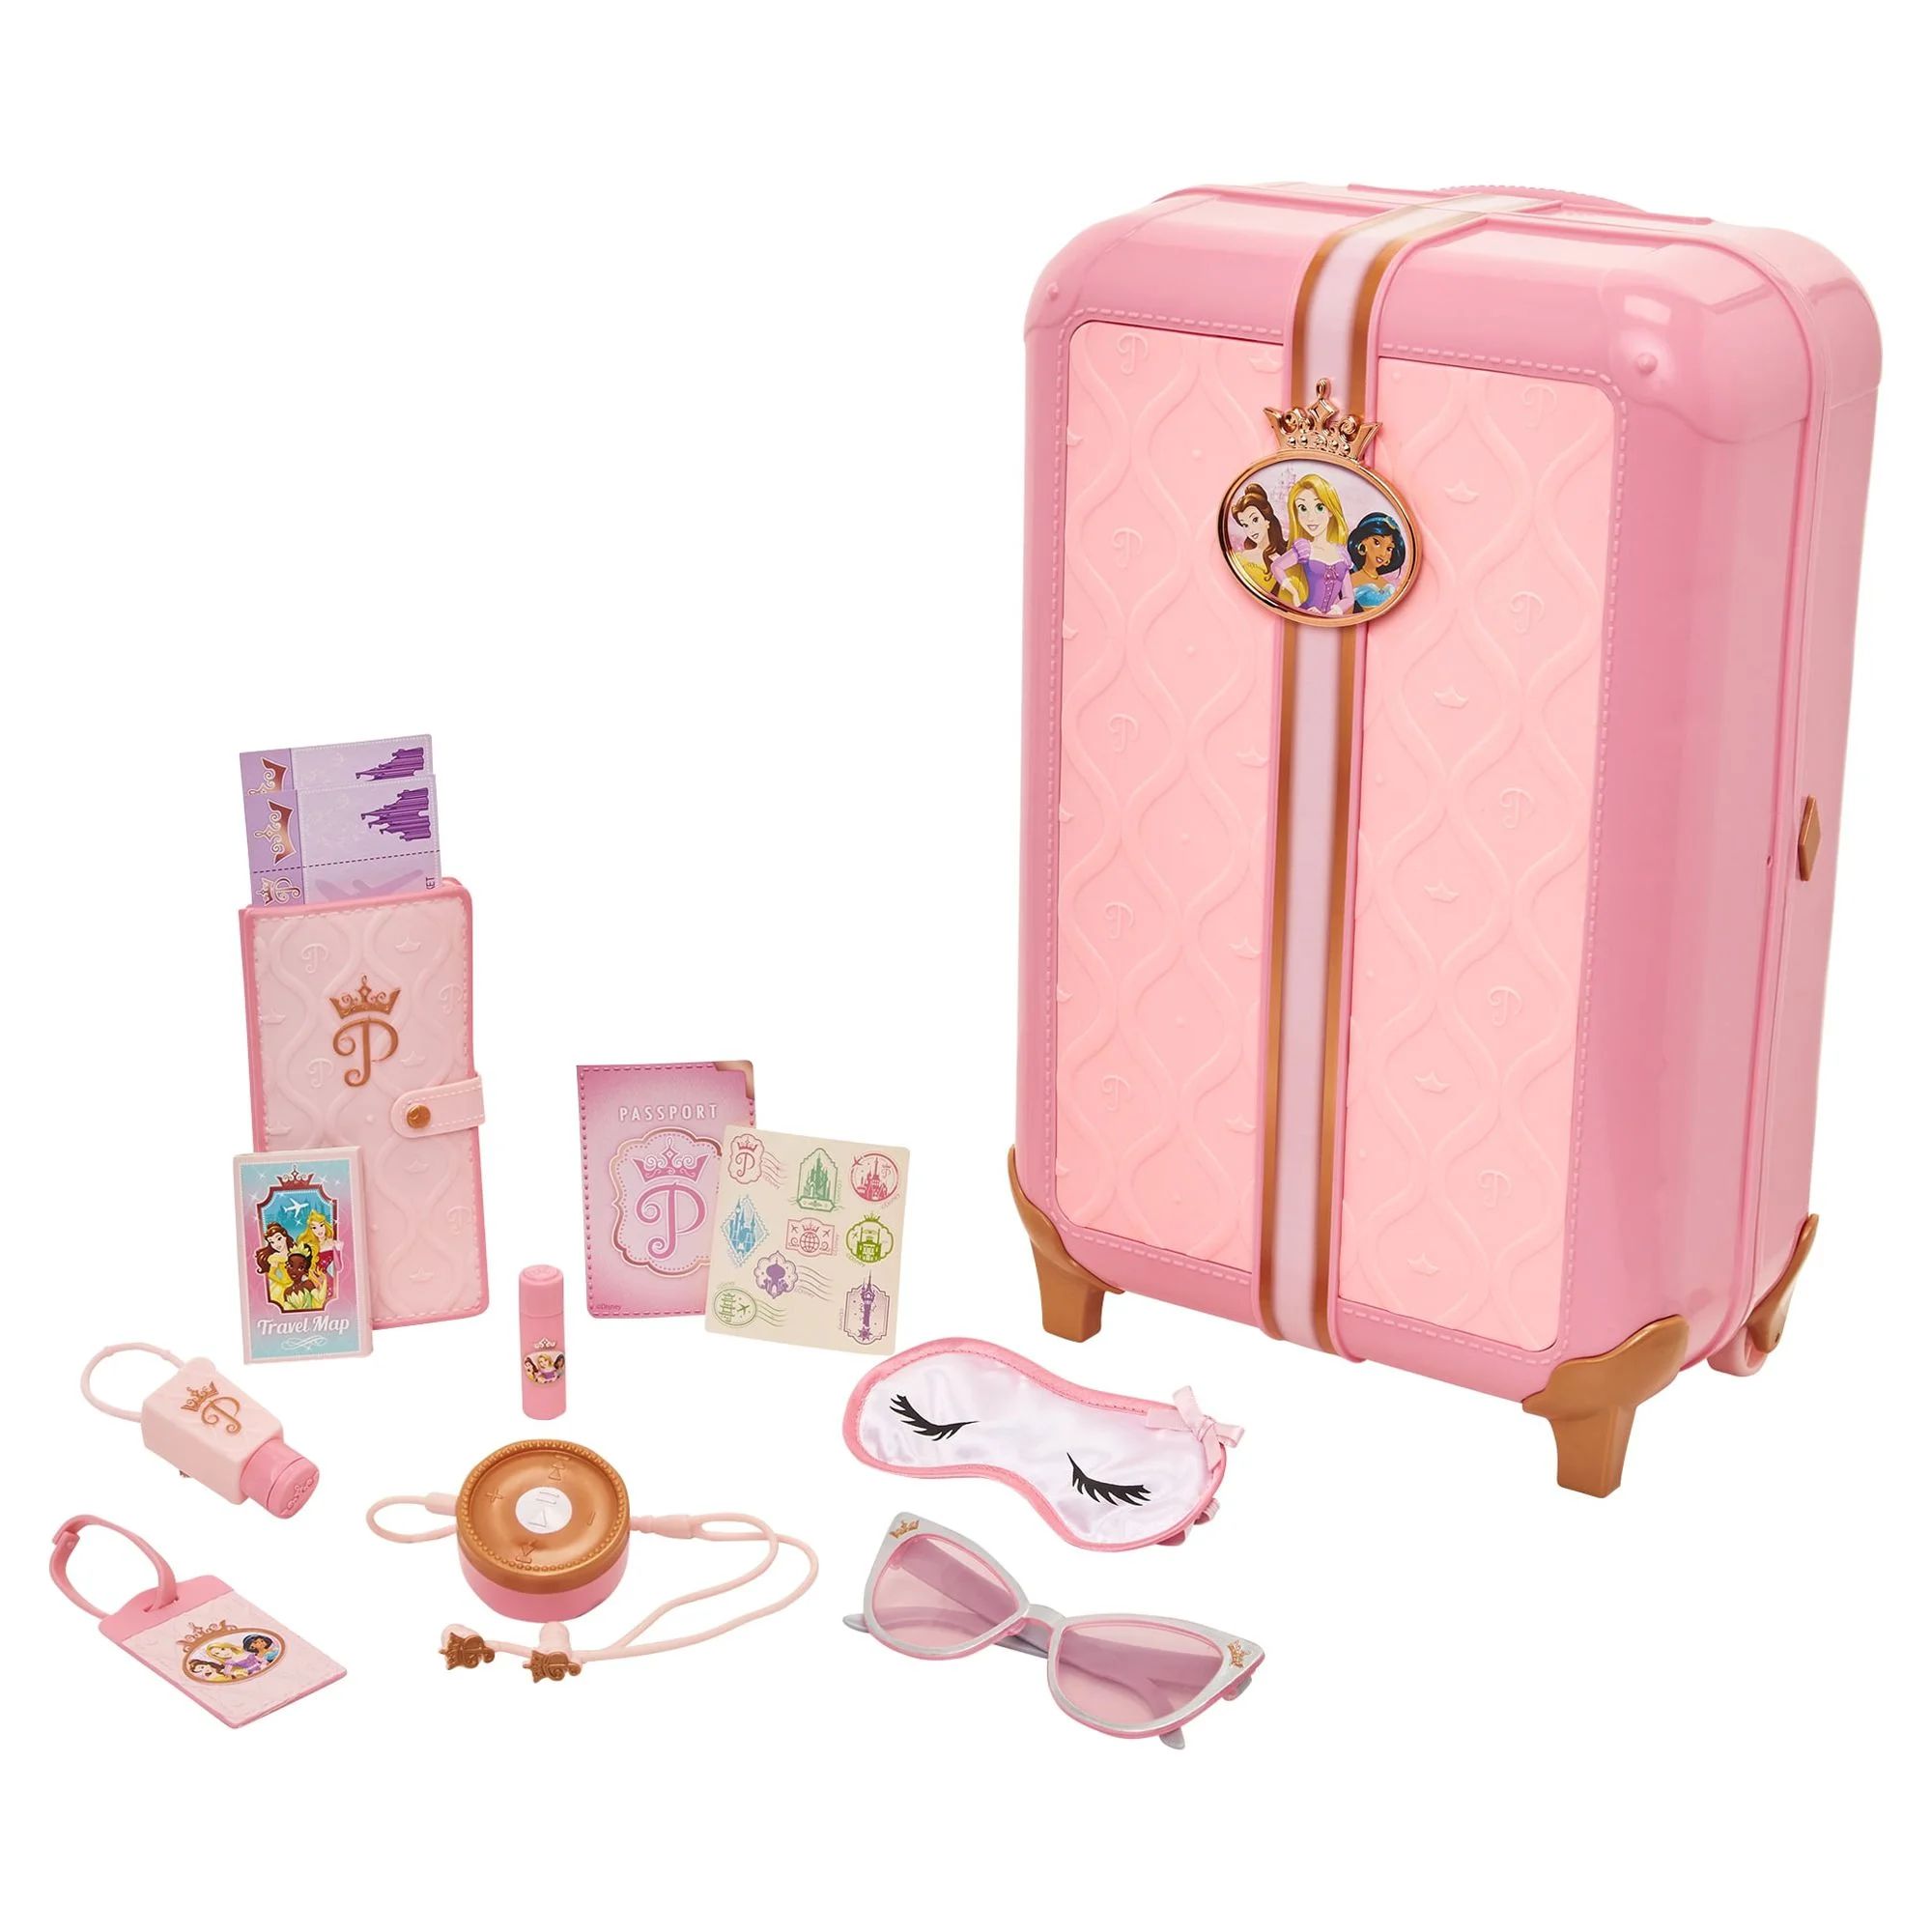 Disney Princess Style Collection Suitcase Traveler Set with 17 travel pieces | Walmart (US)